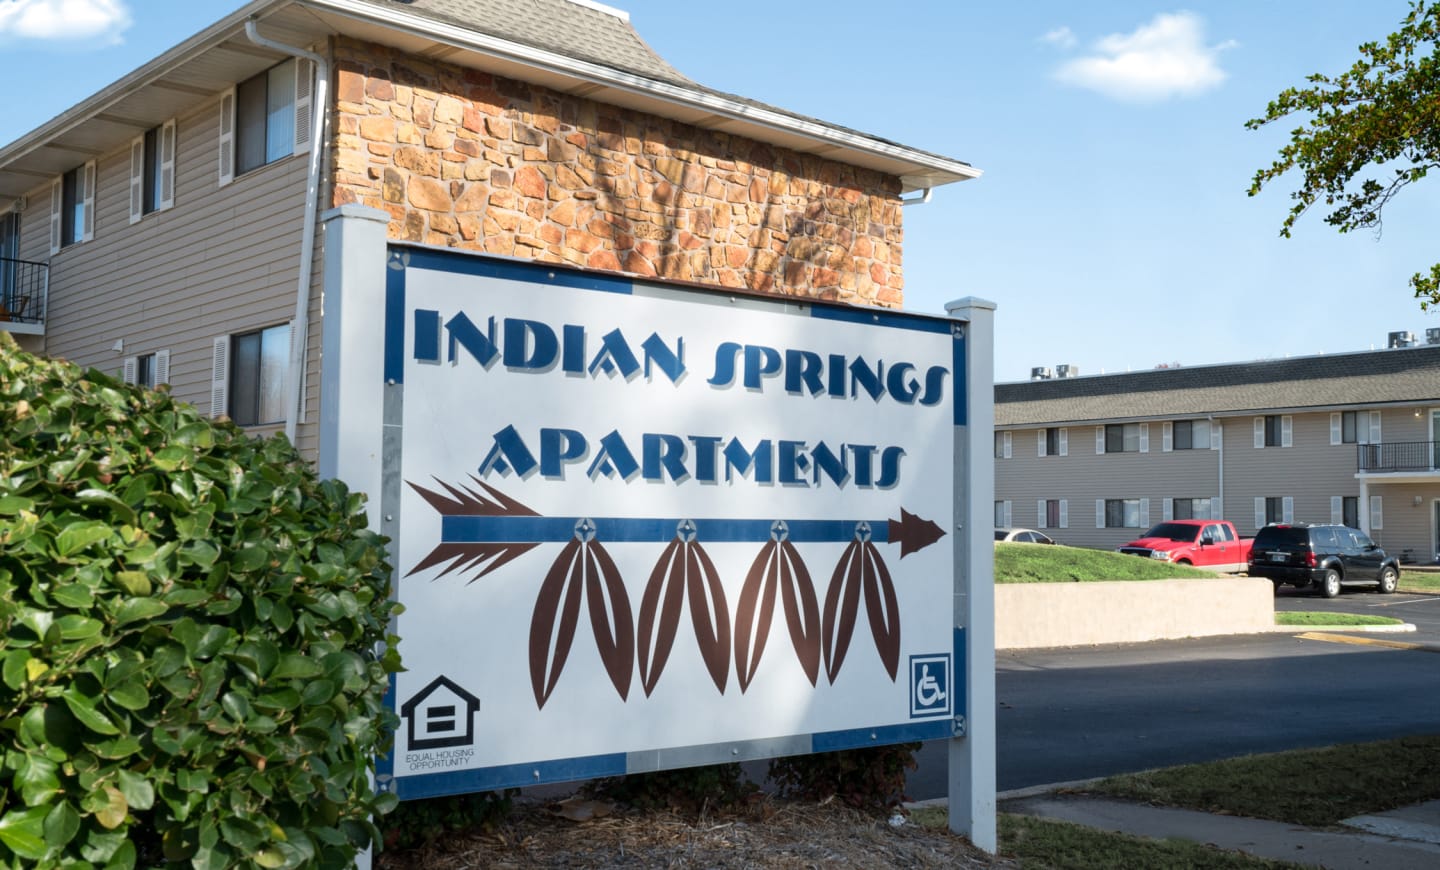 INDIAN SPRINGS APARTMENTS